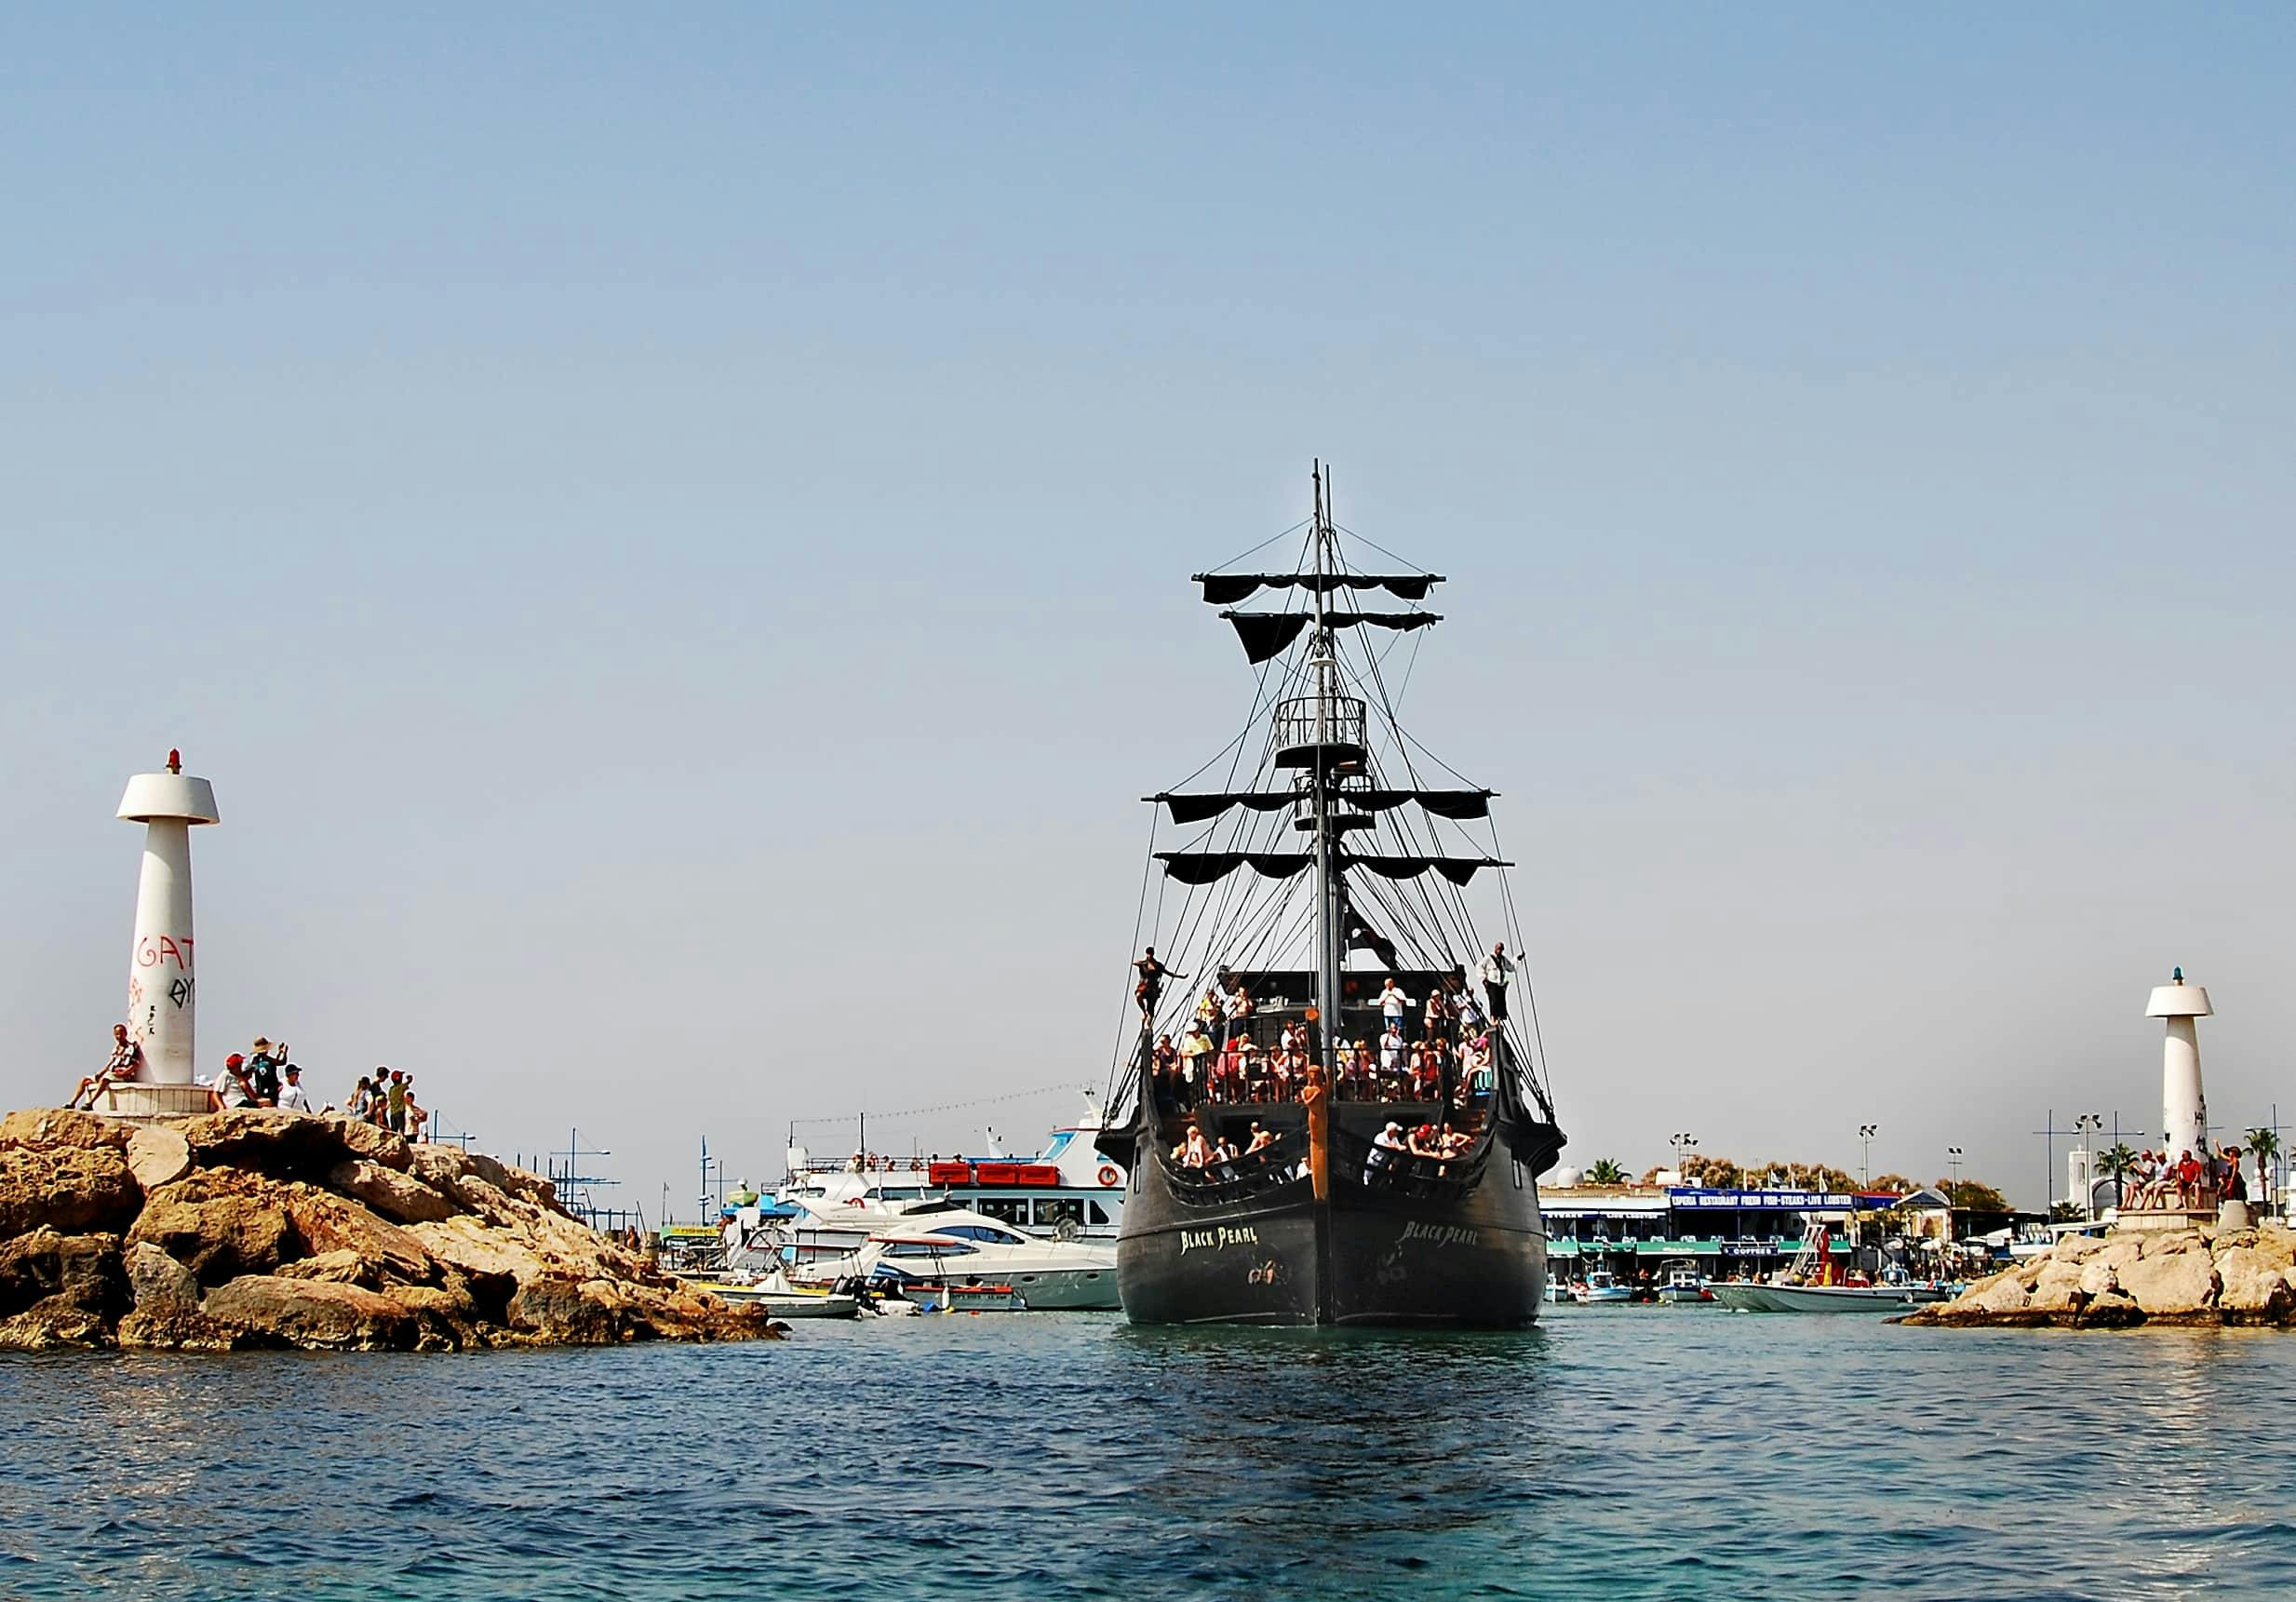 Black Pearl Pirate Cruise with Transport